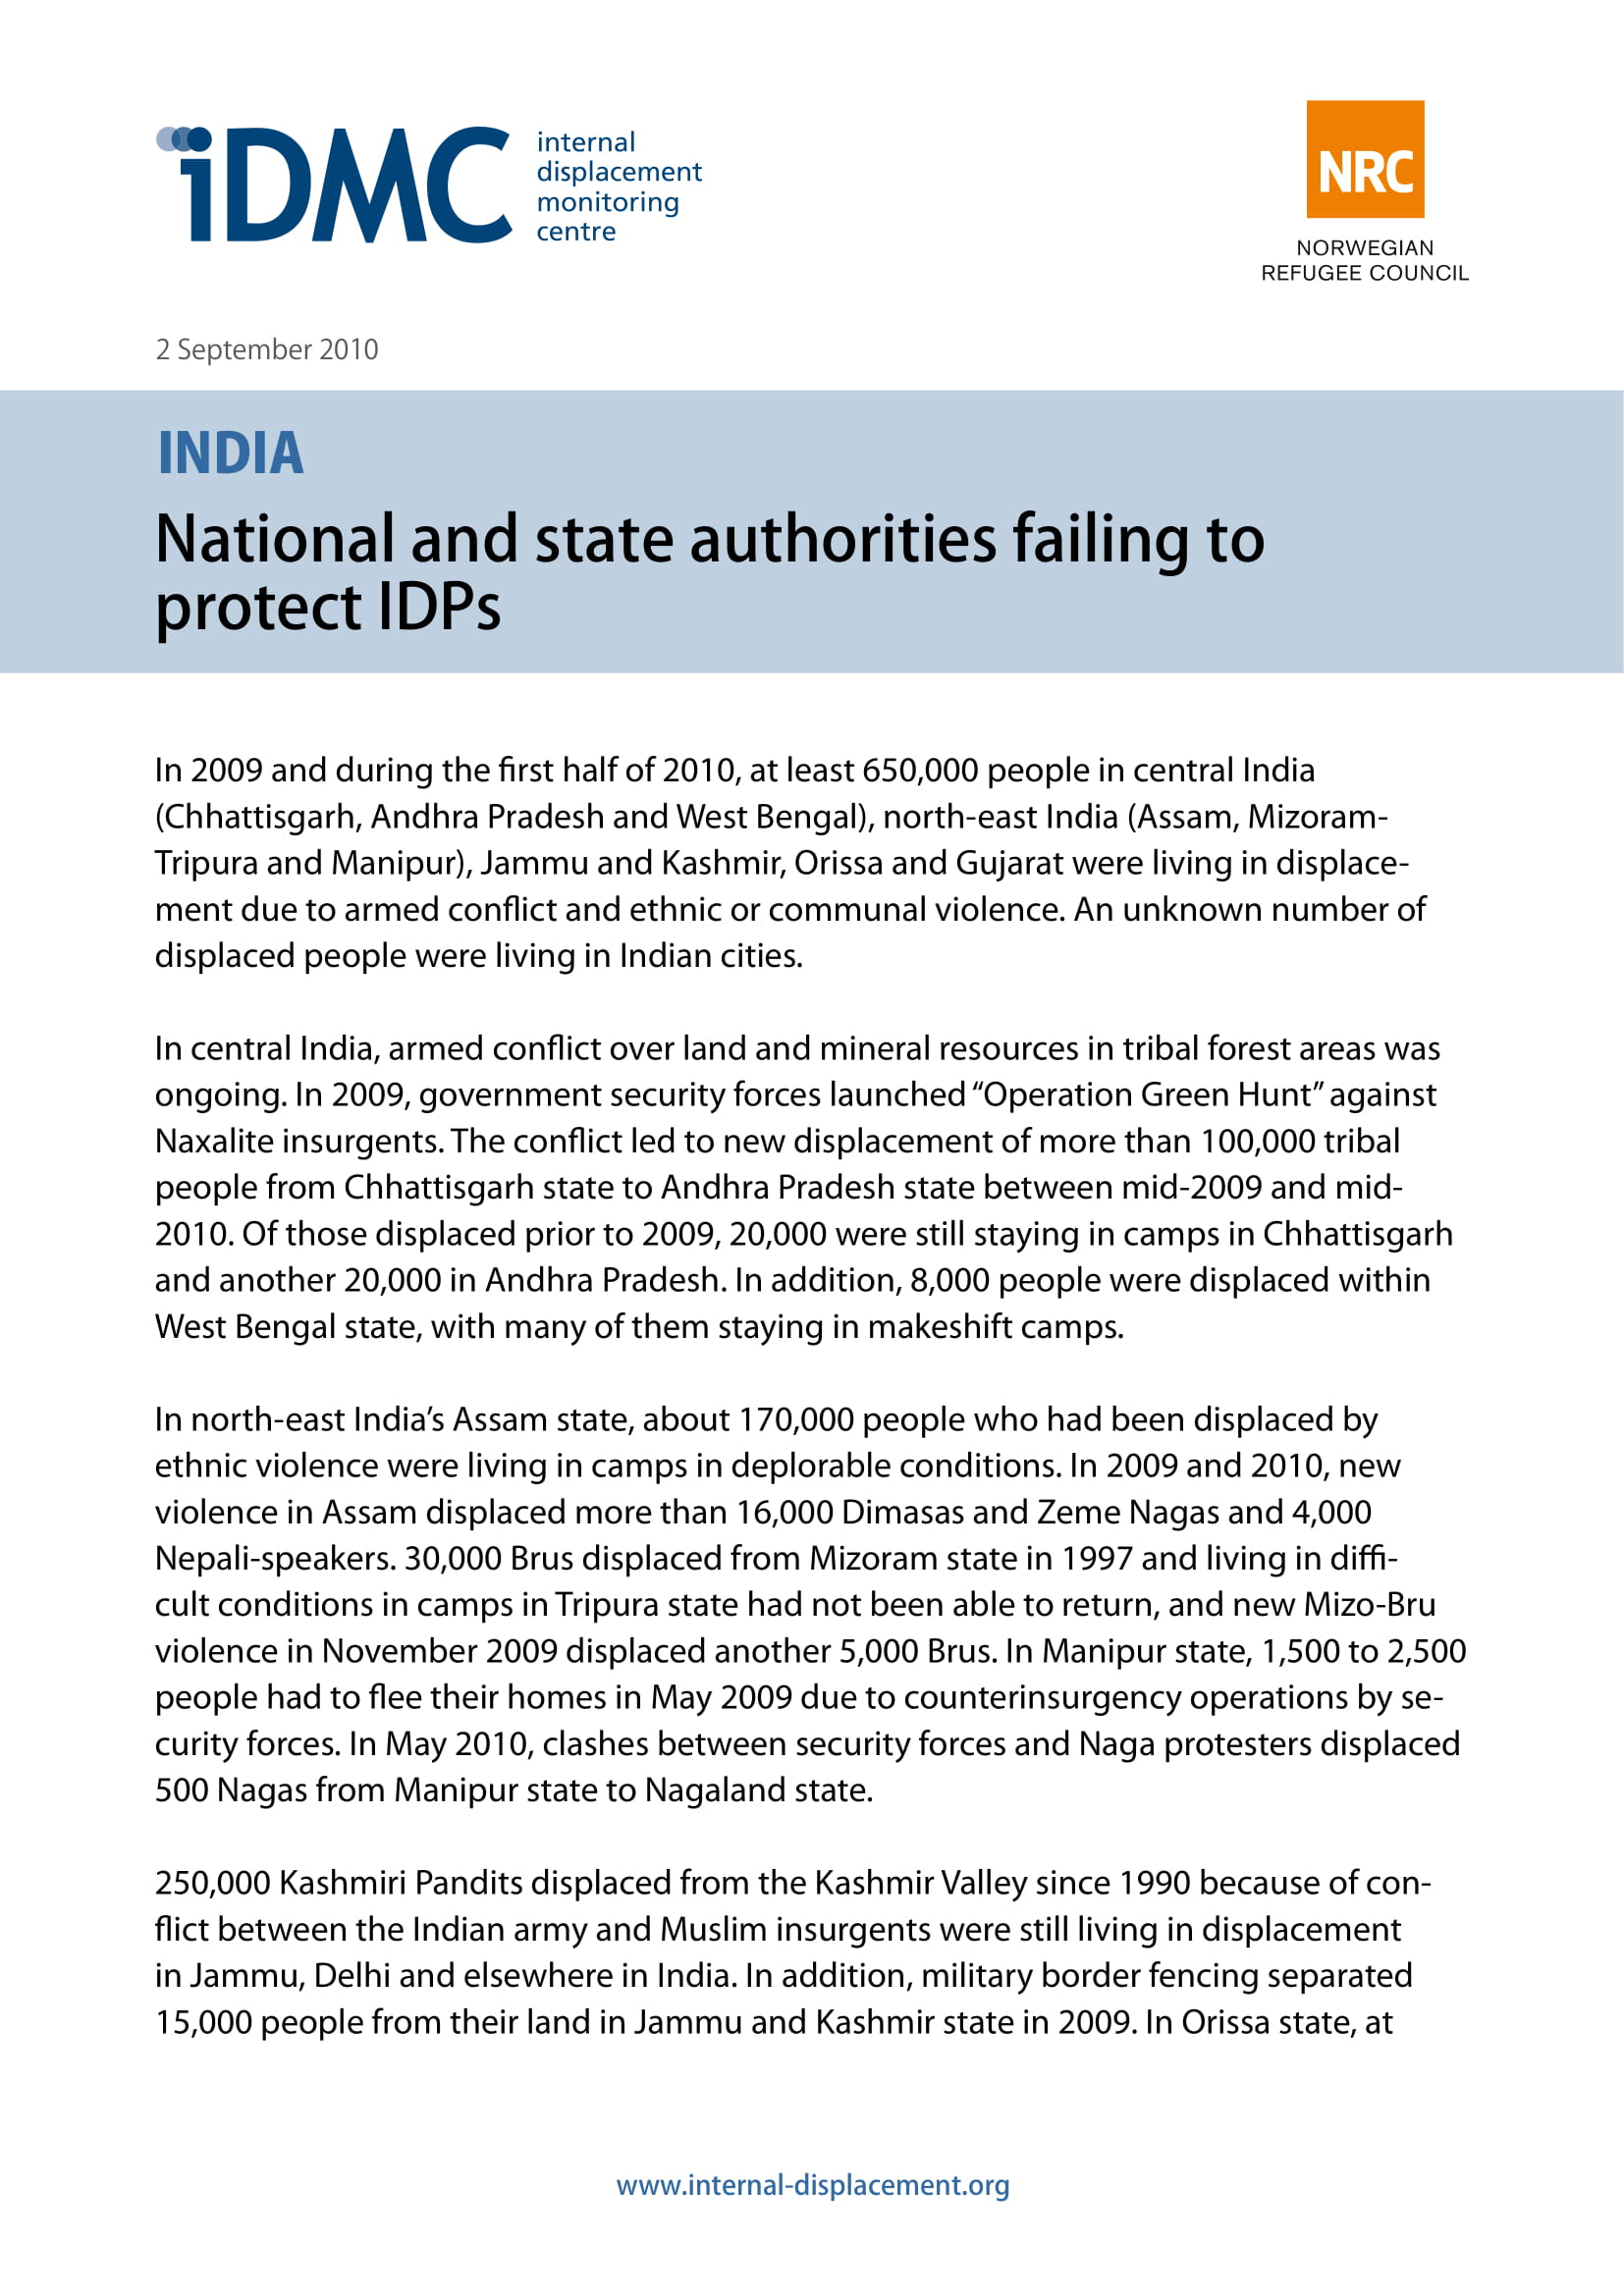 India: National and state authorities failing to protect IDPs